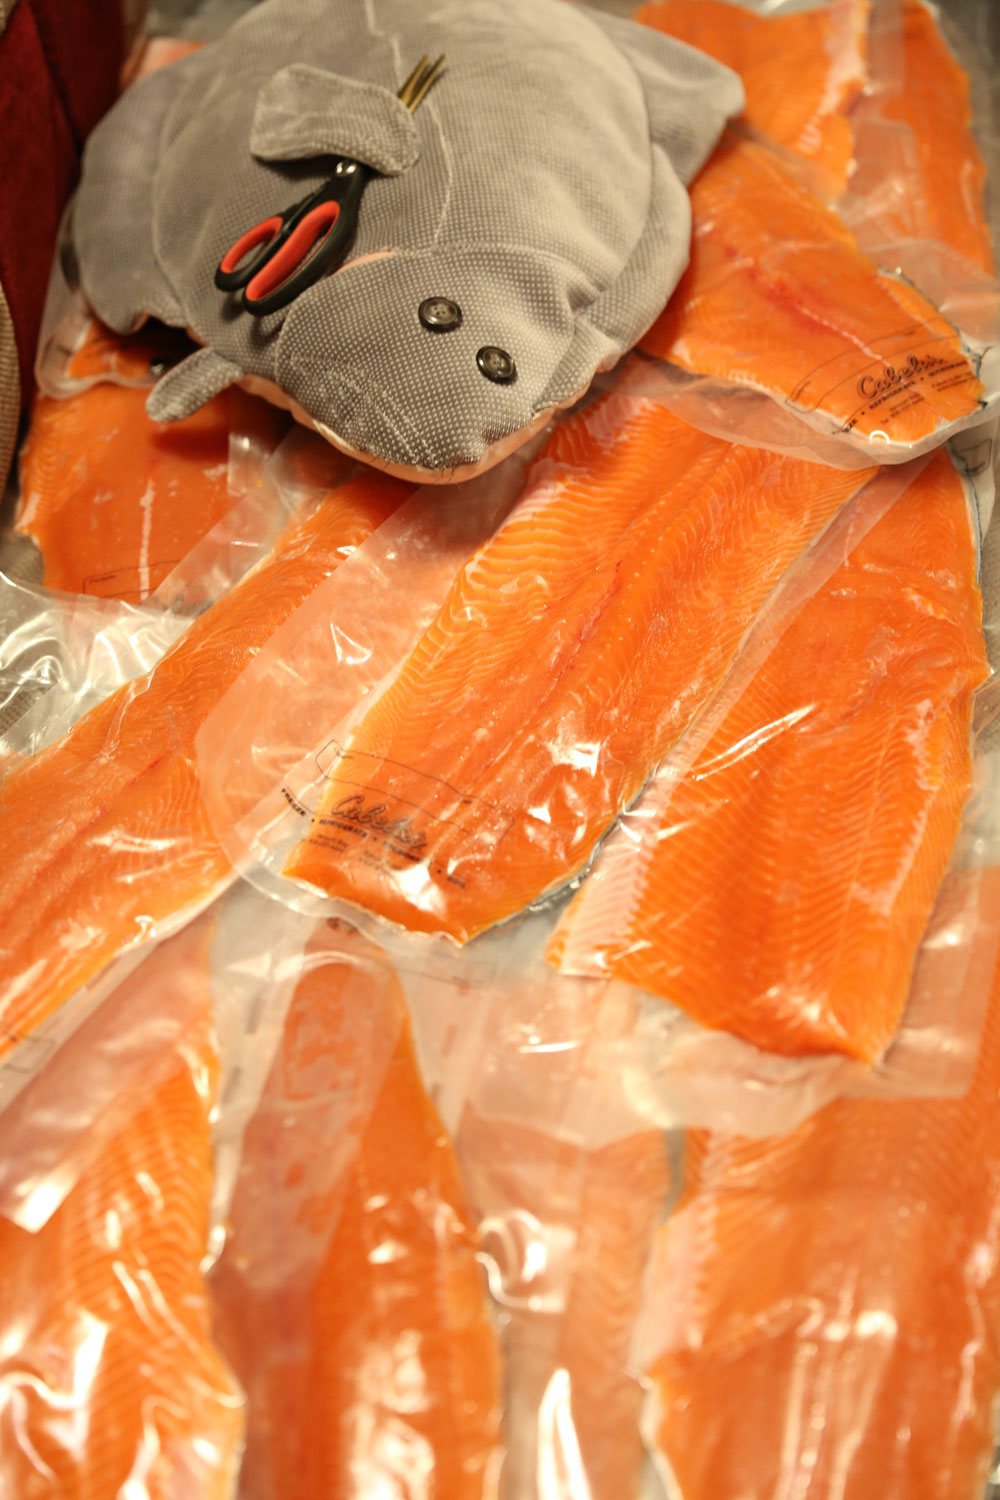 Halibut with scissors to open the vacuum packed salmon